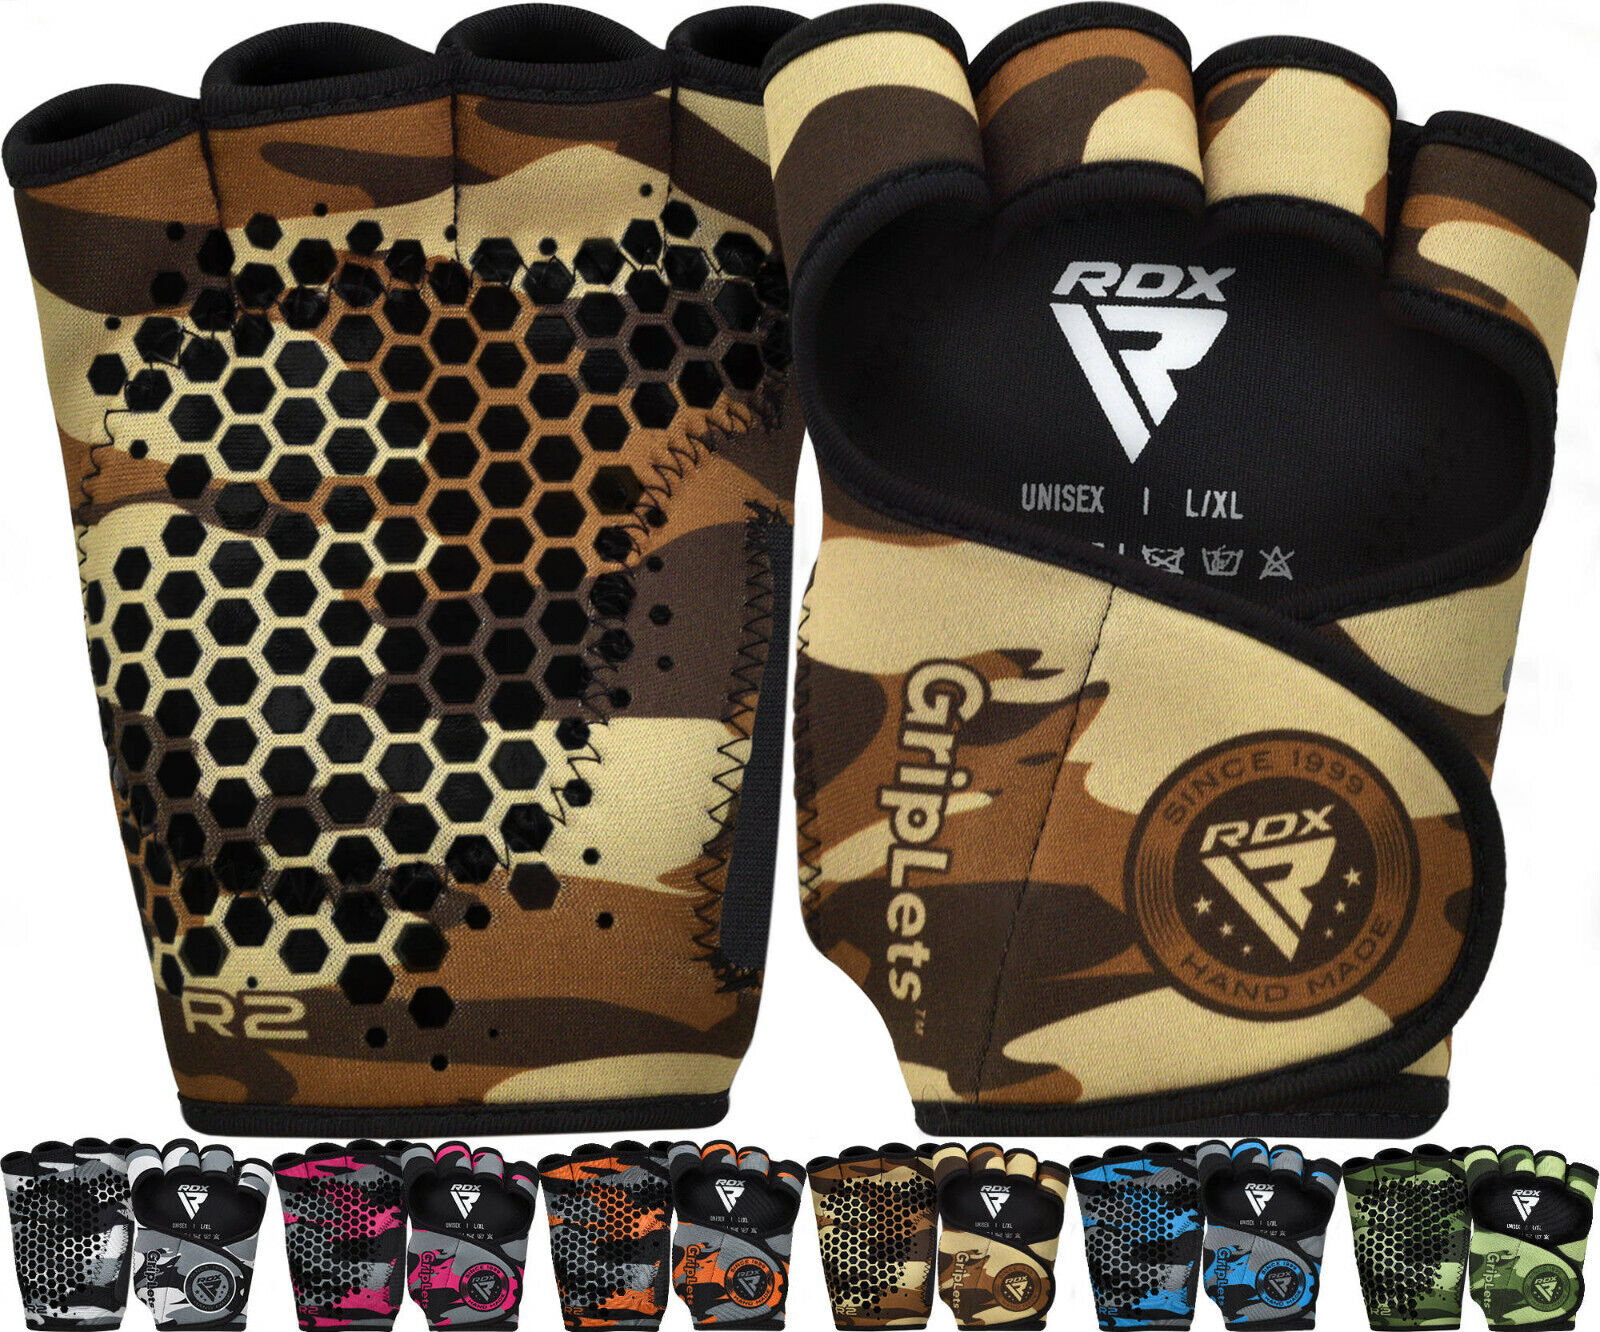 Weight Lifting Gloves by RDX, Fitness, Gym, Workout Gloves for Strength Training